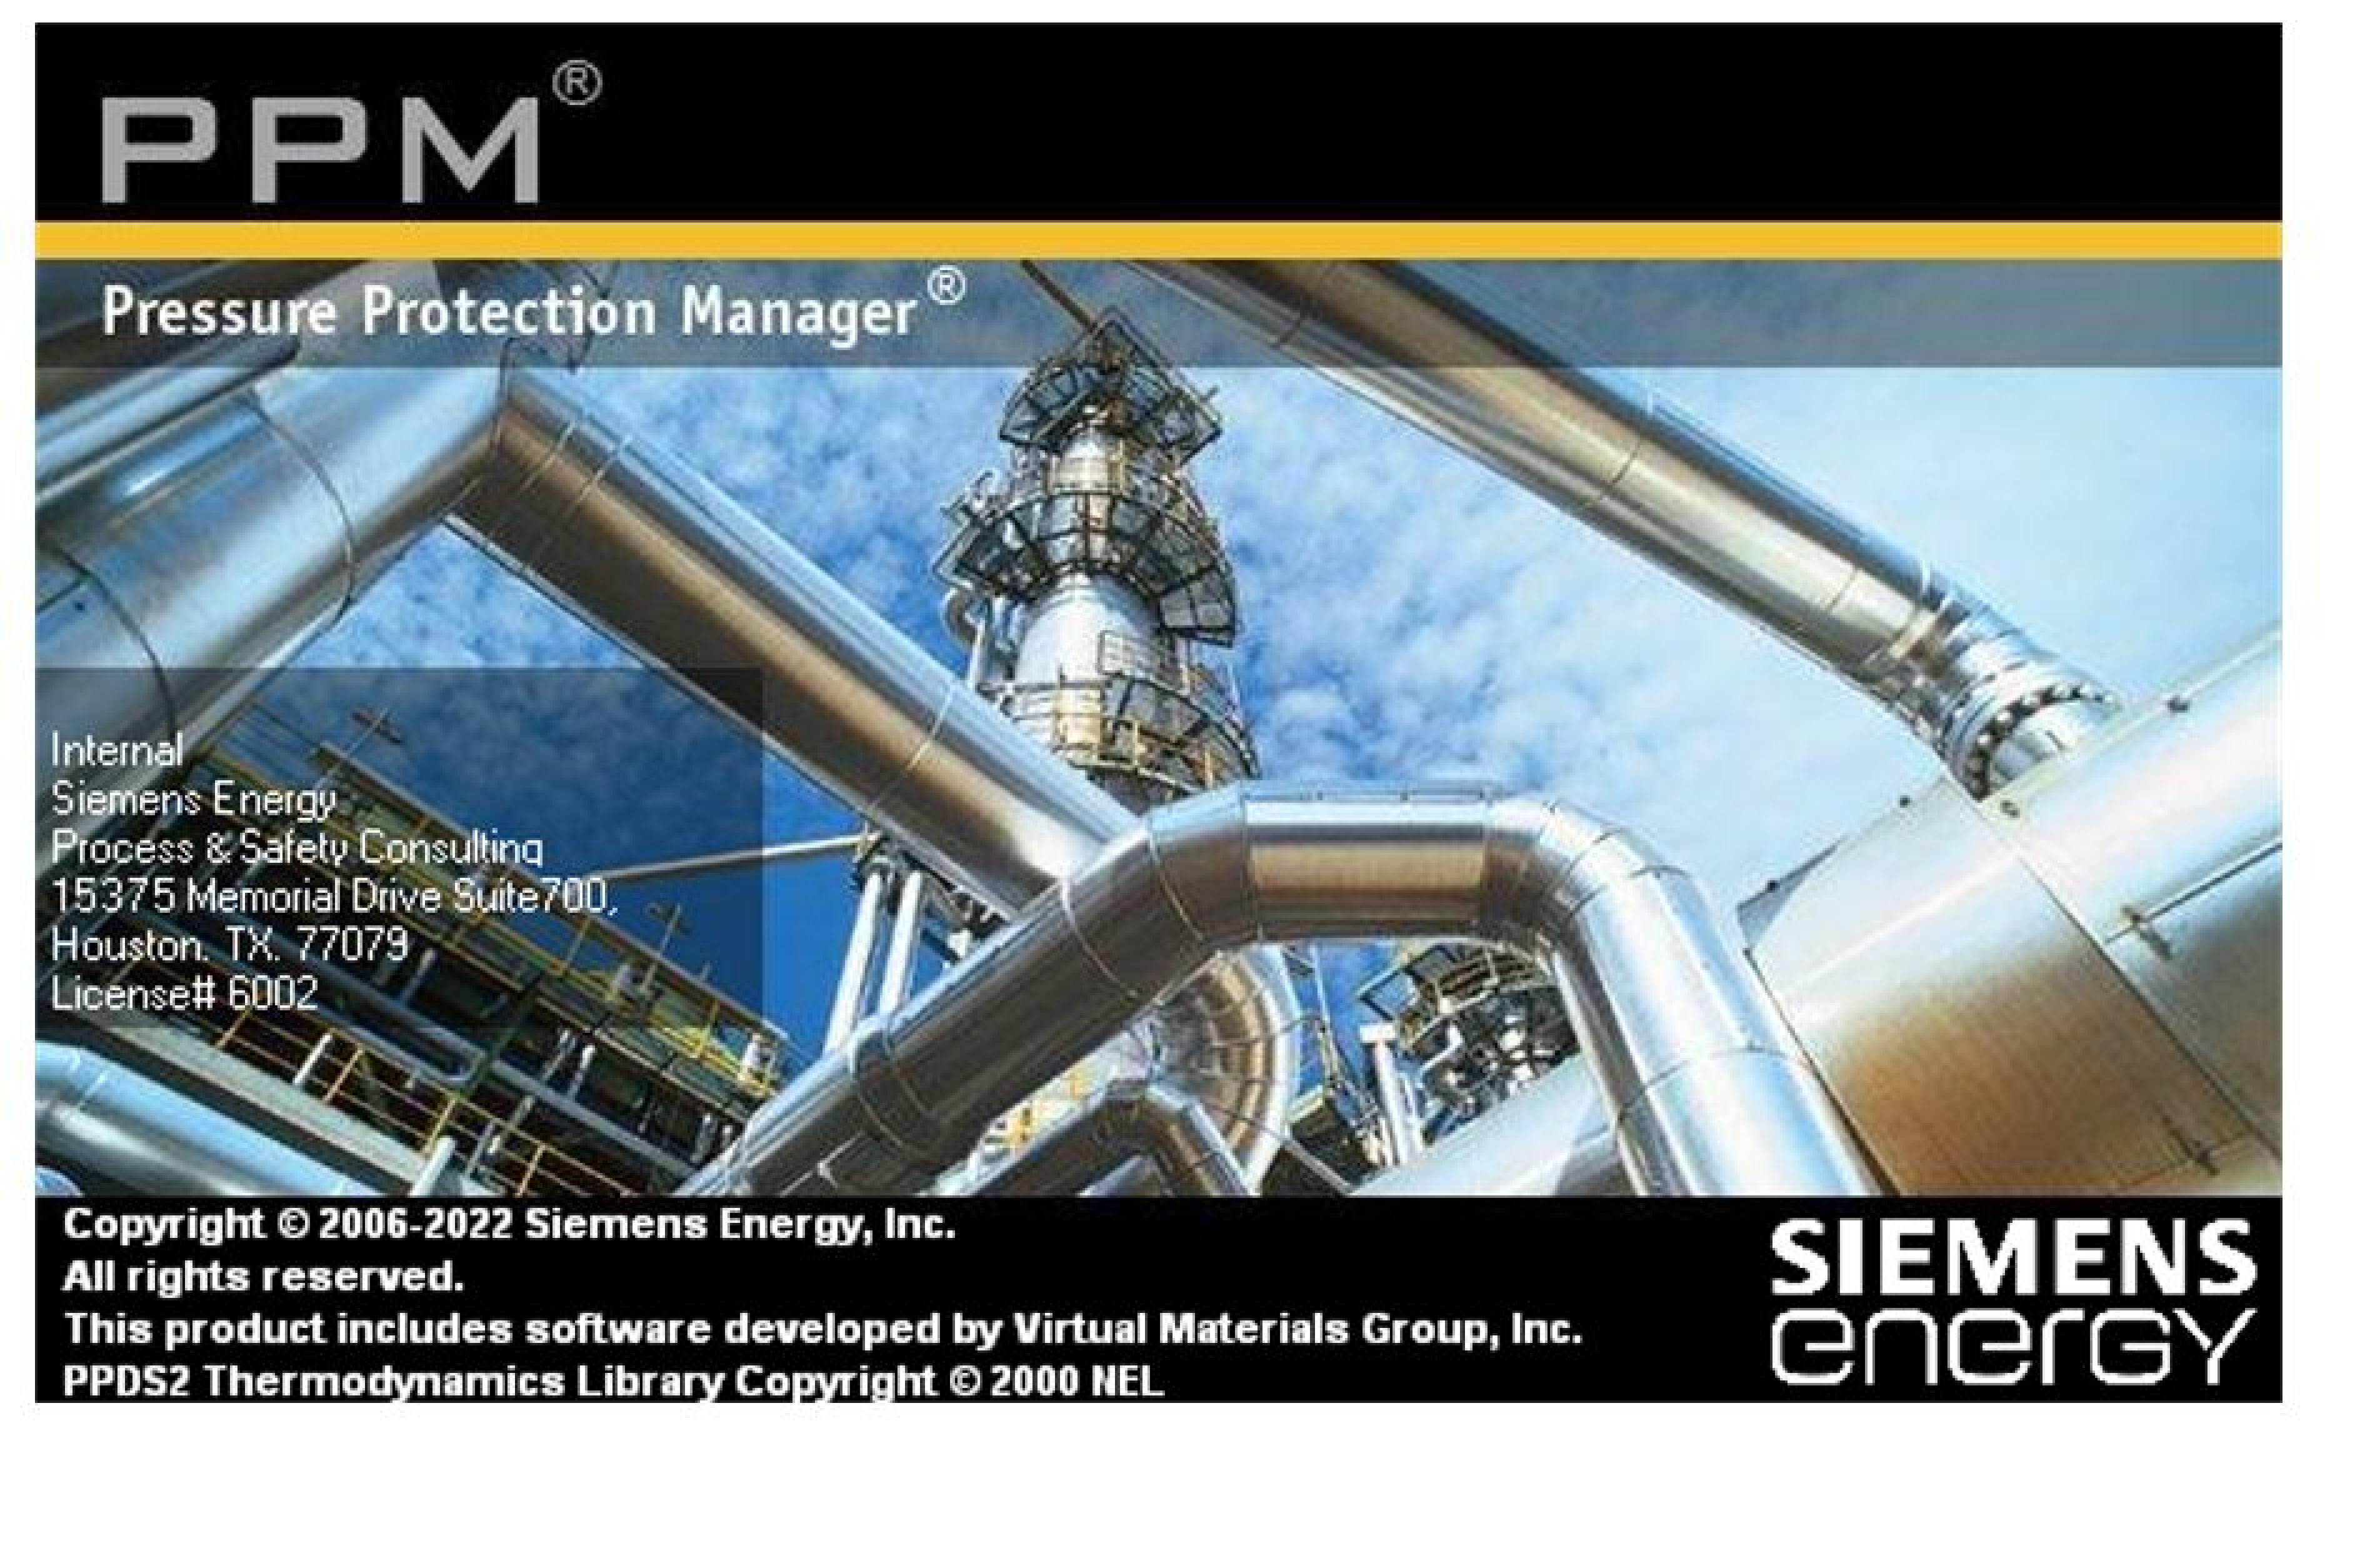 PRESSURE PROTECTION MANAGER